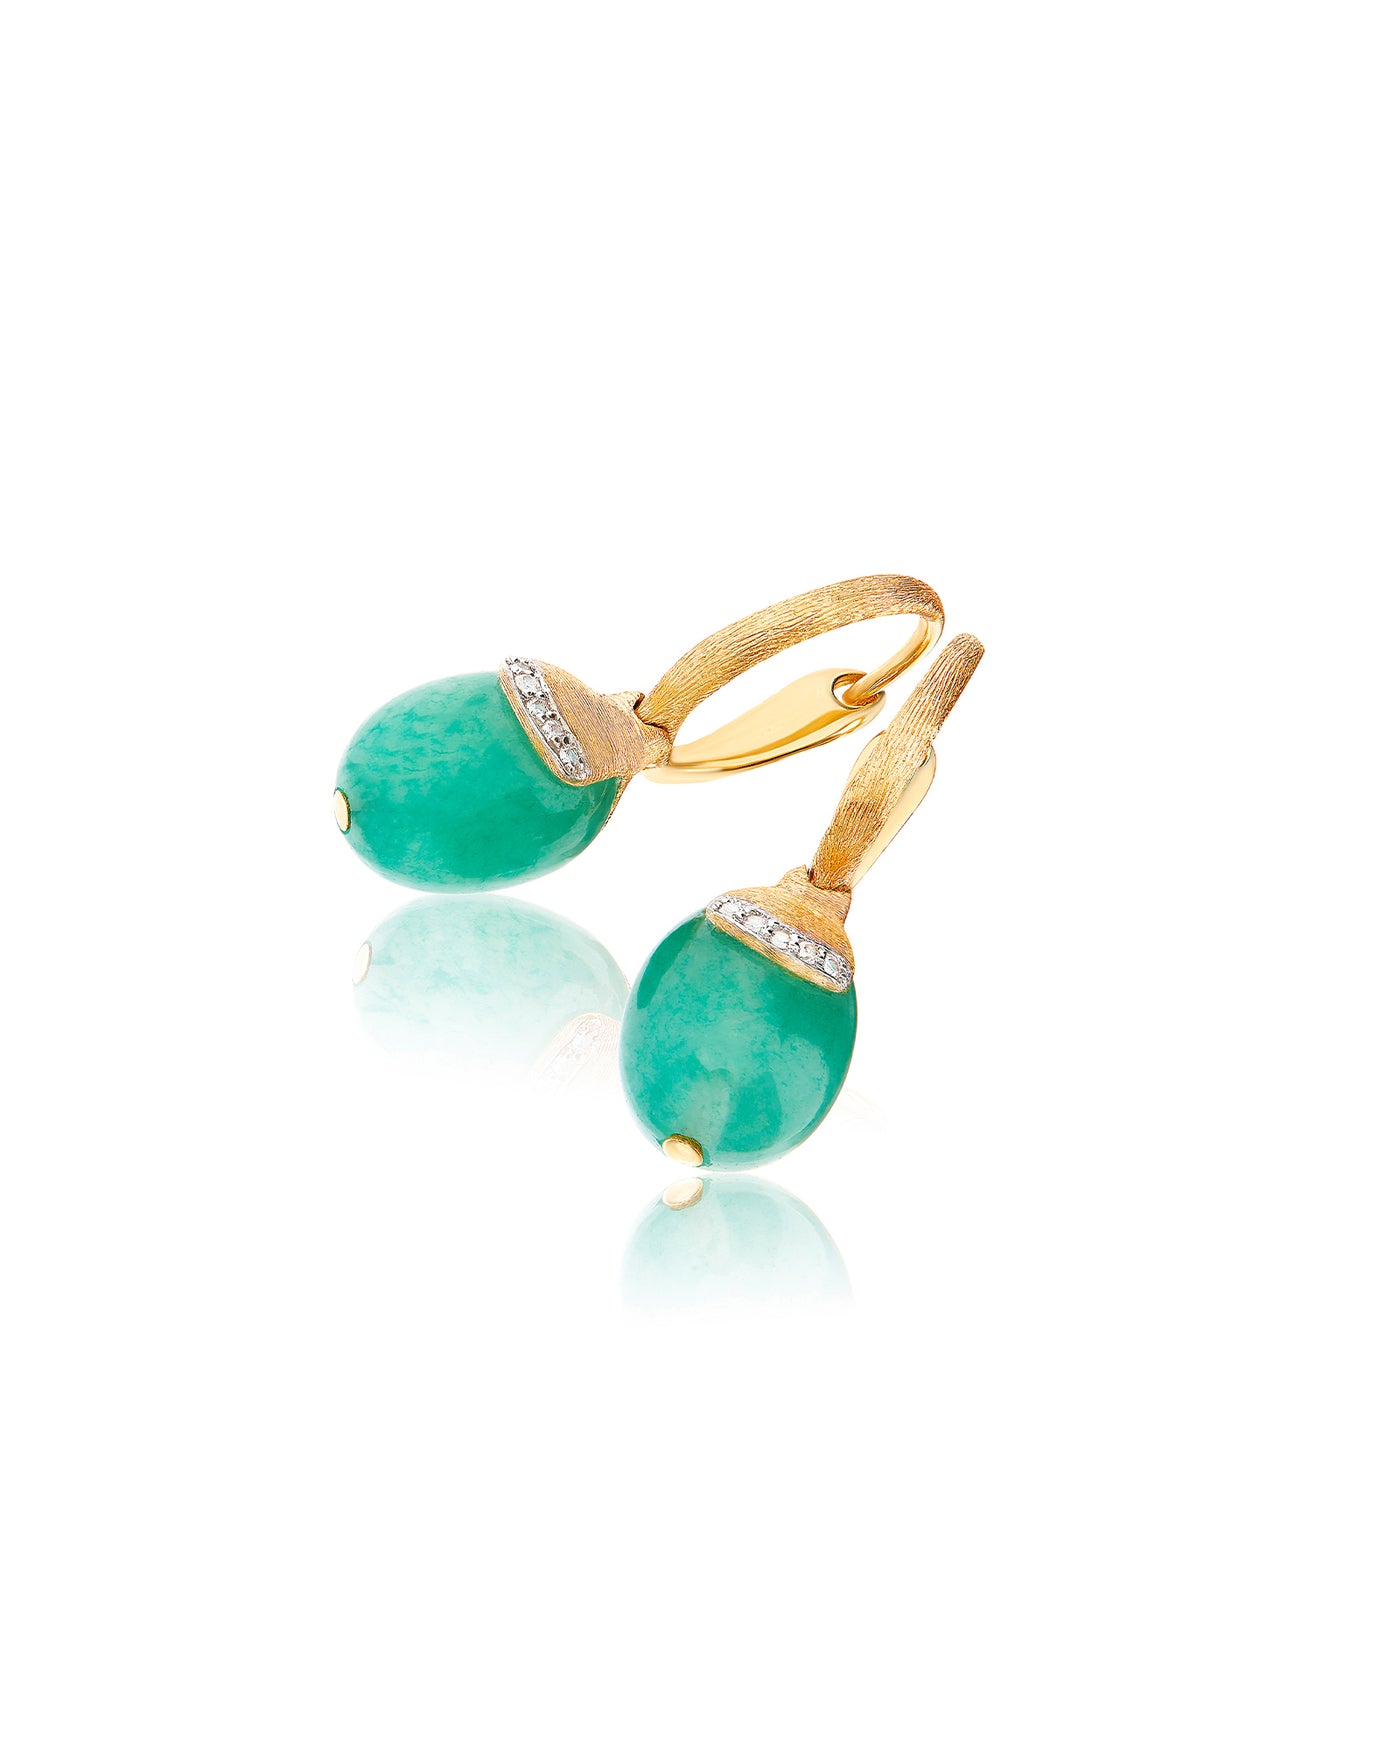 "Amazonia" ciliegine gold and green aventurine ball drop earrings with diamonds details (small)